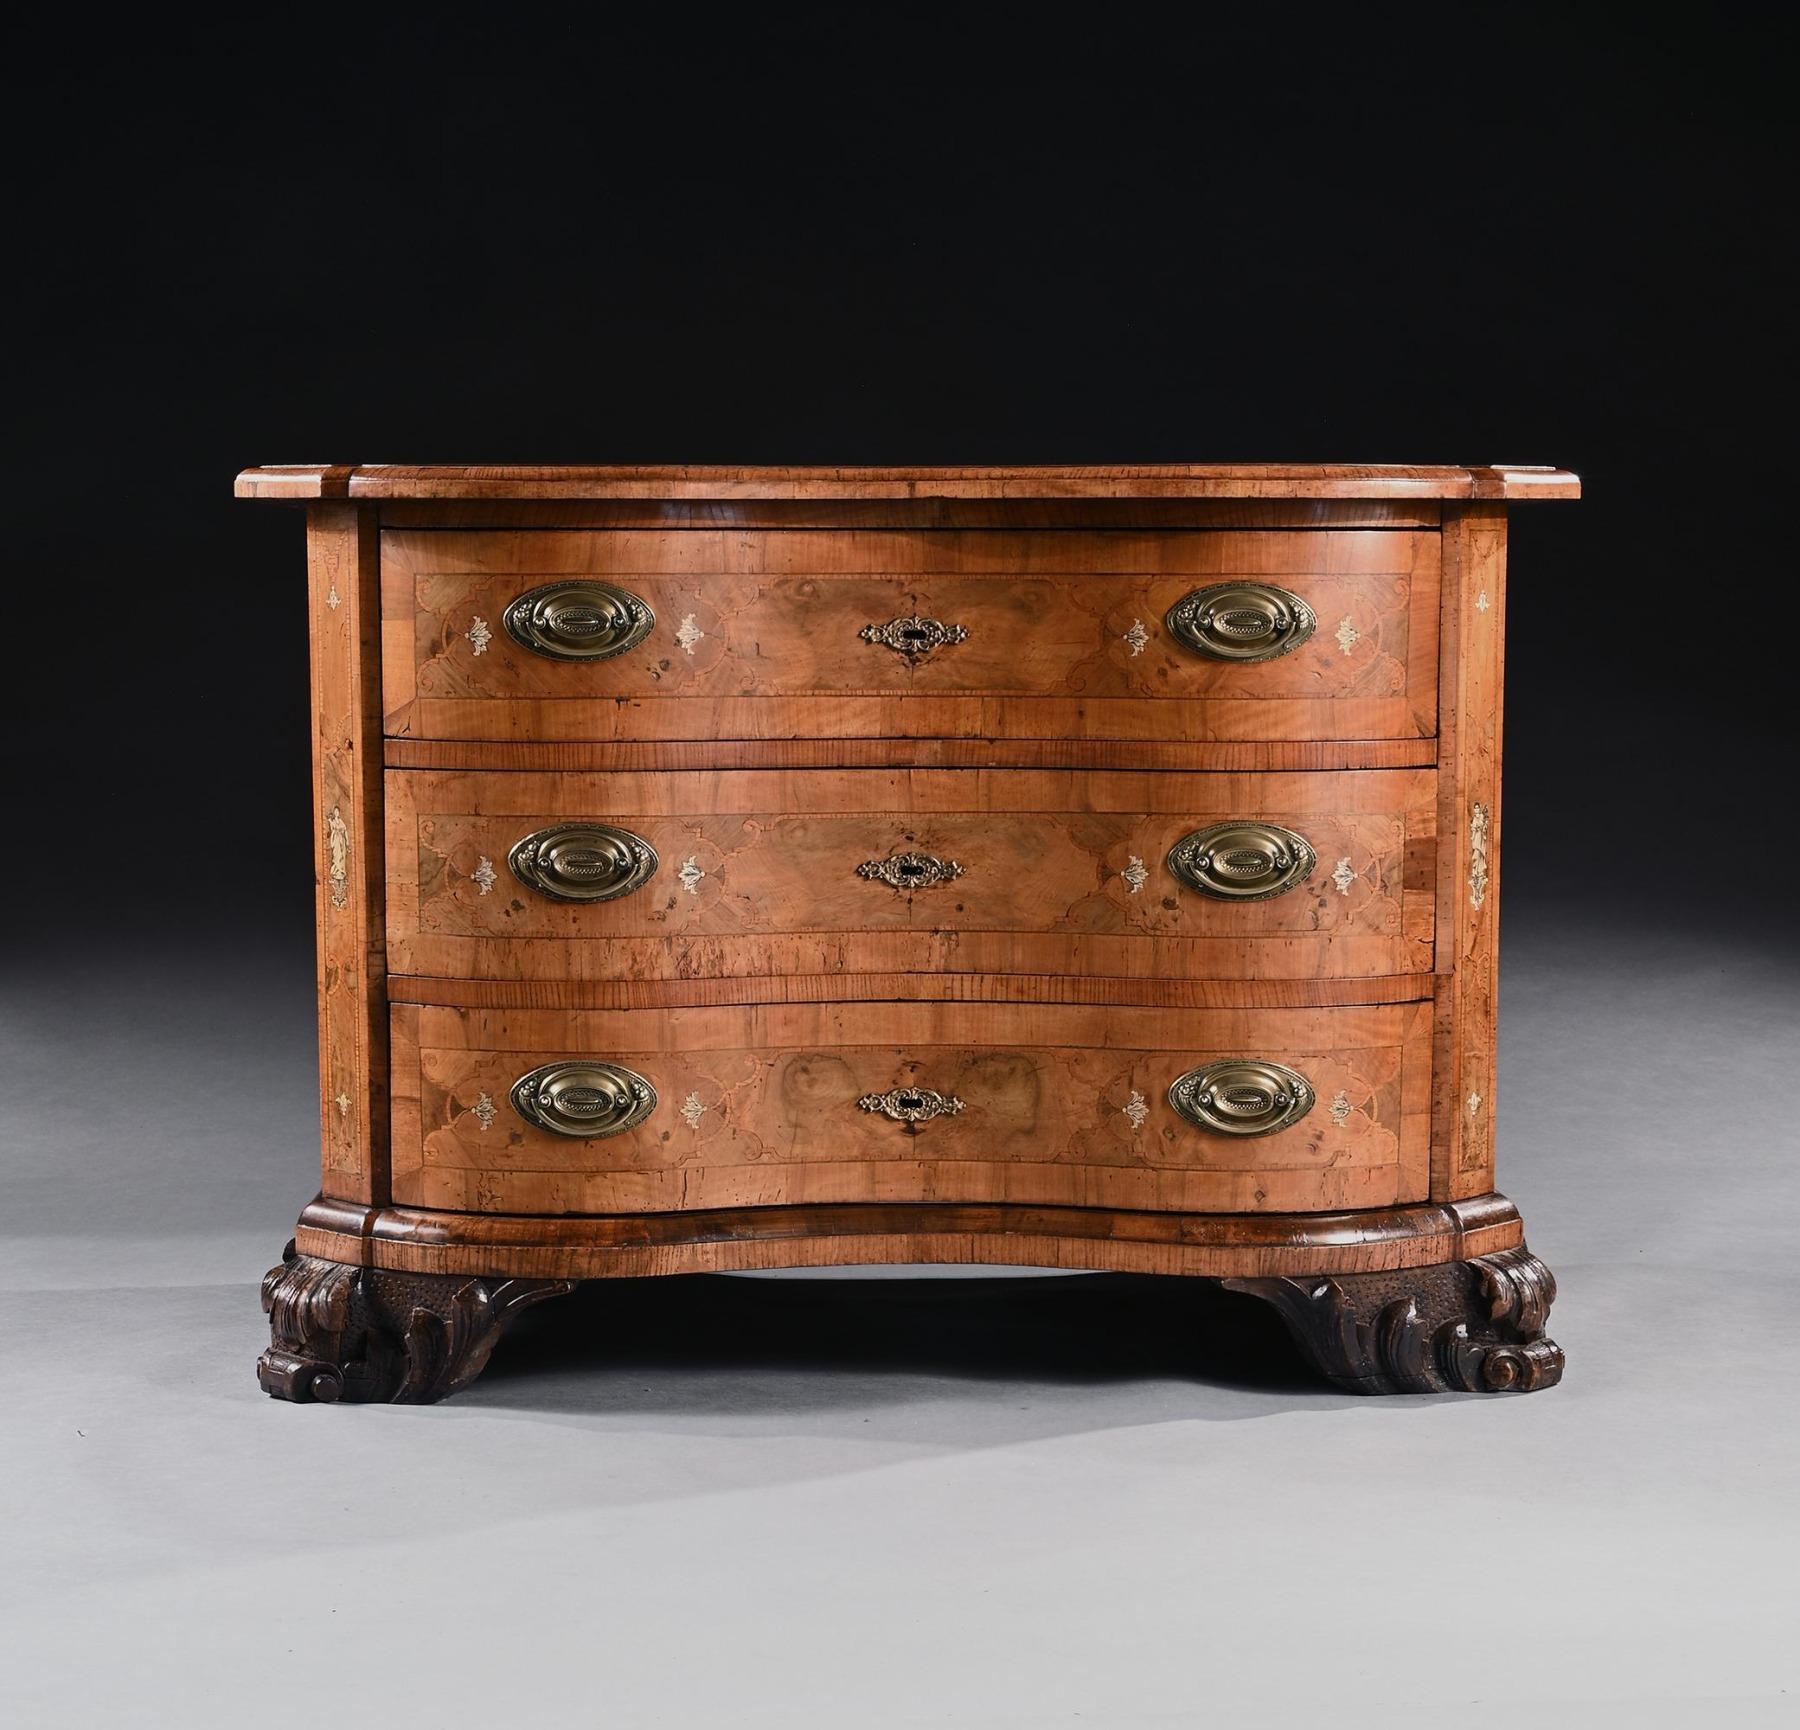 Rare Mid 18th Century German Walnut Pewter & Ivory Marquetry Serpentine Commode For Sale 1